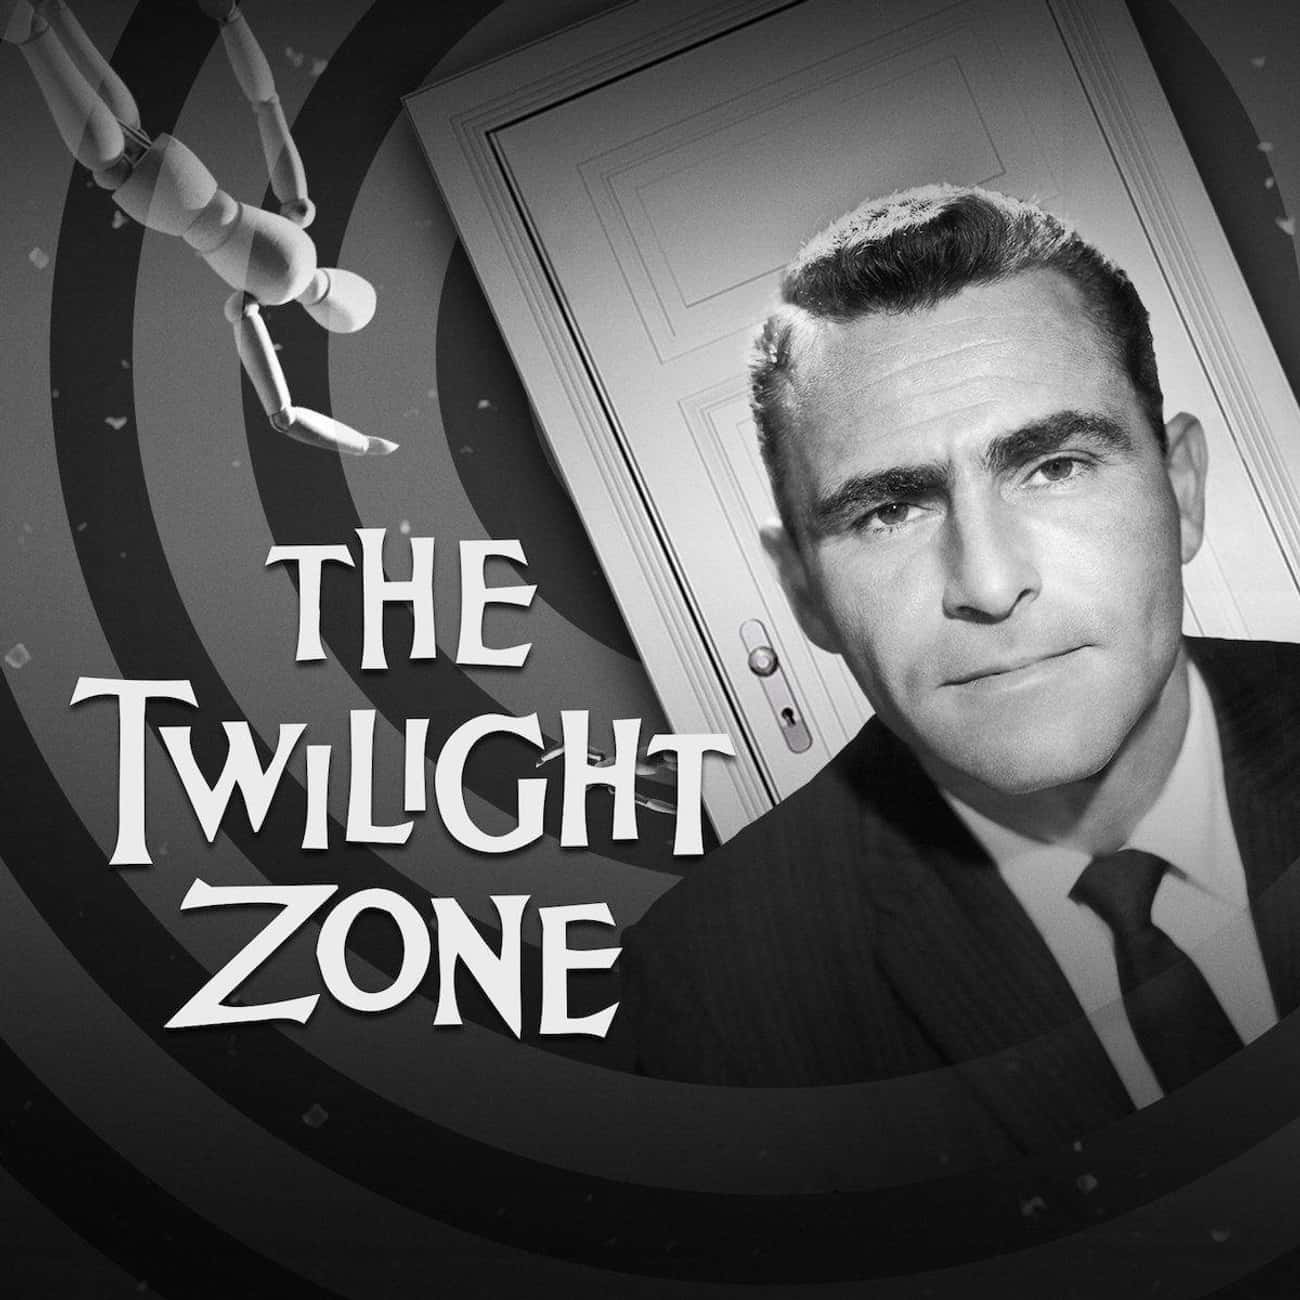 Imagine A List With Every 'Twilight Zone' Show & Revival, Ranked